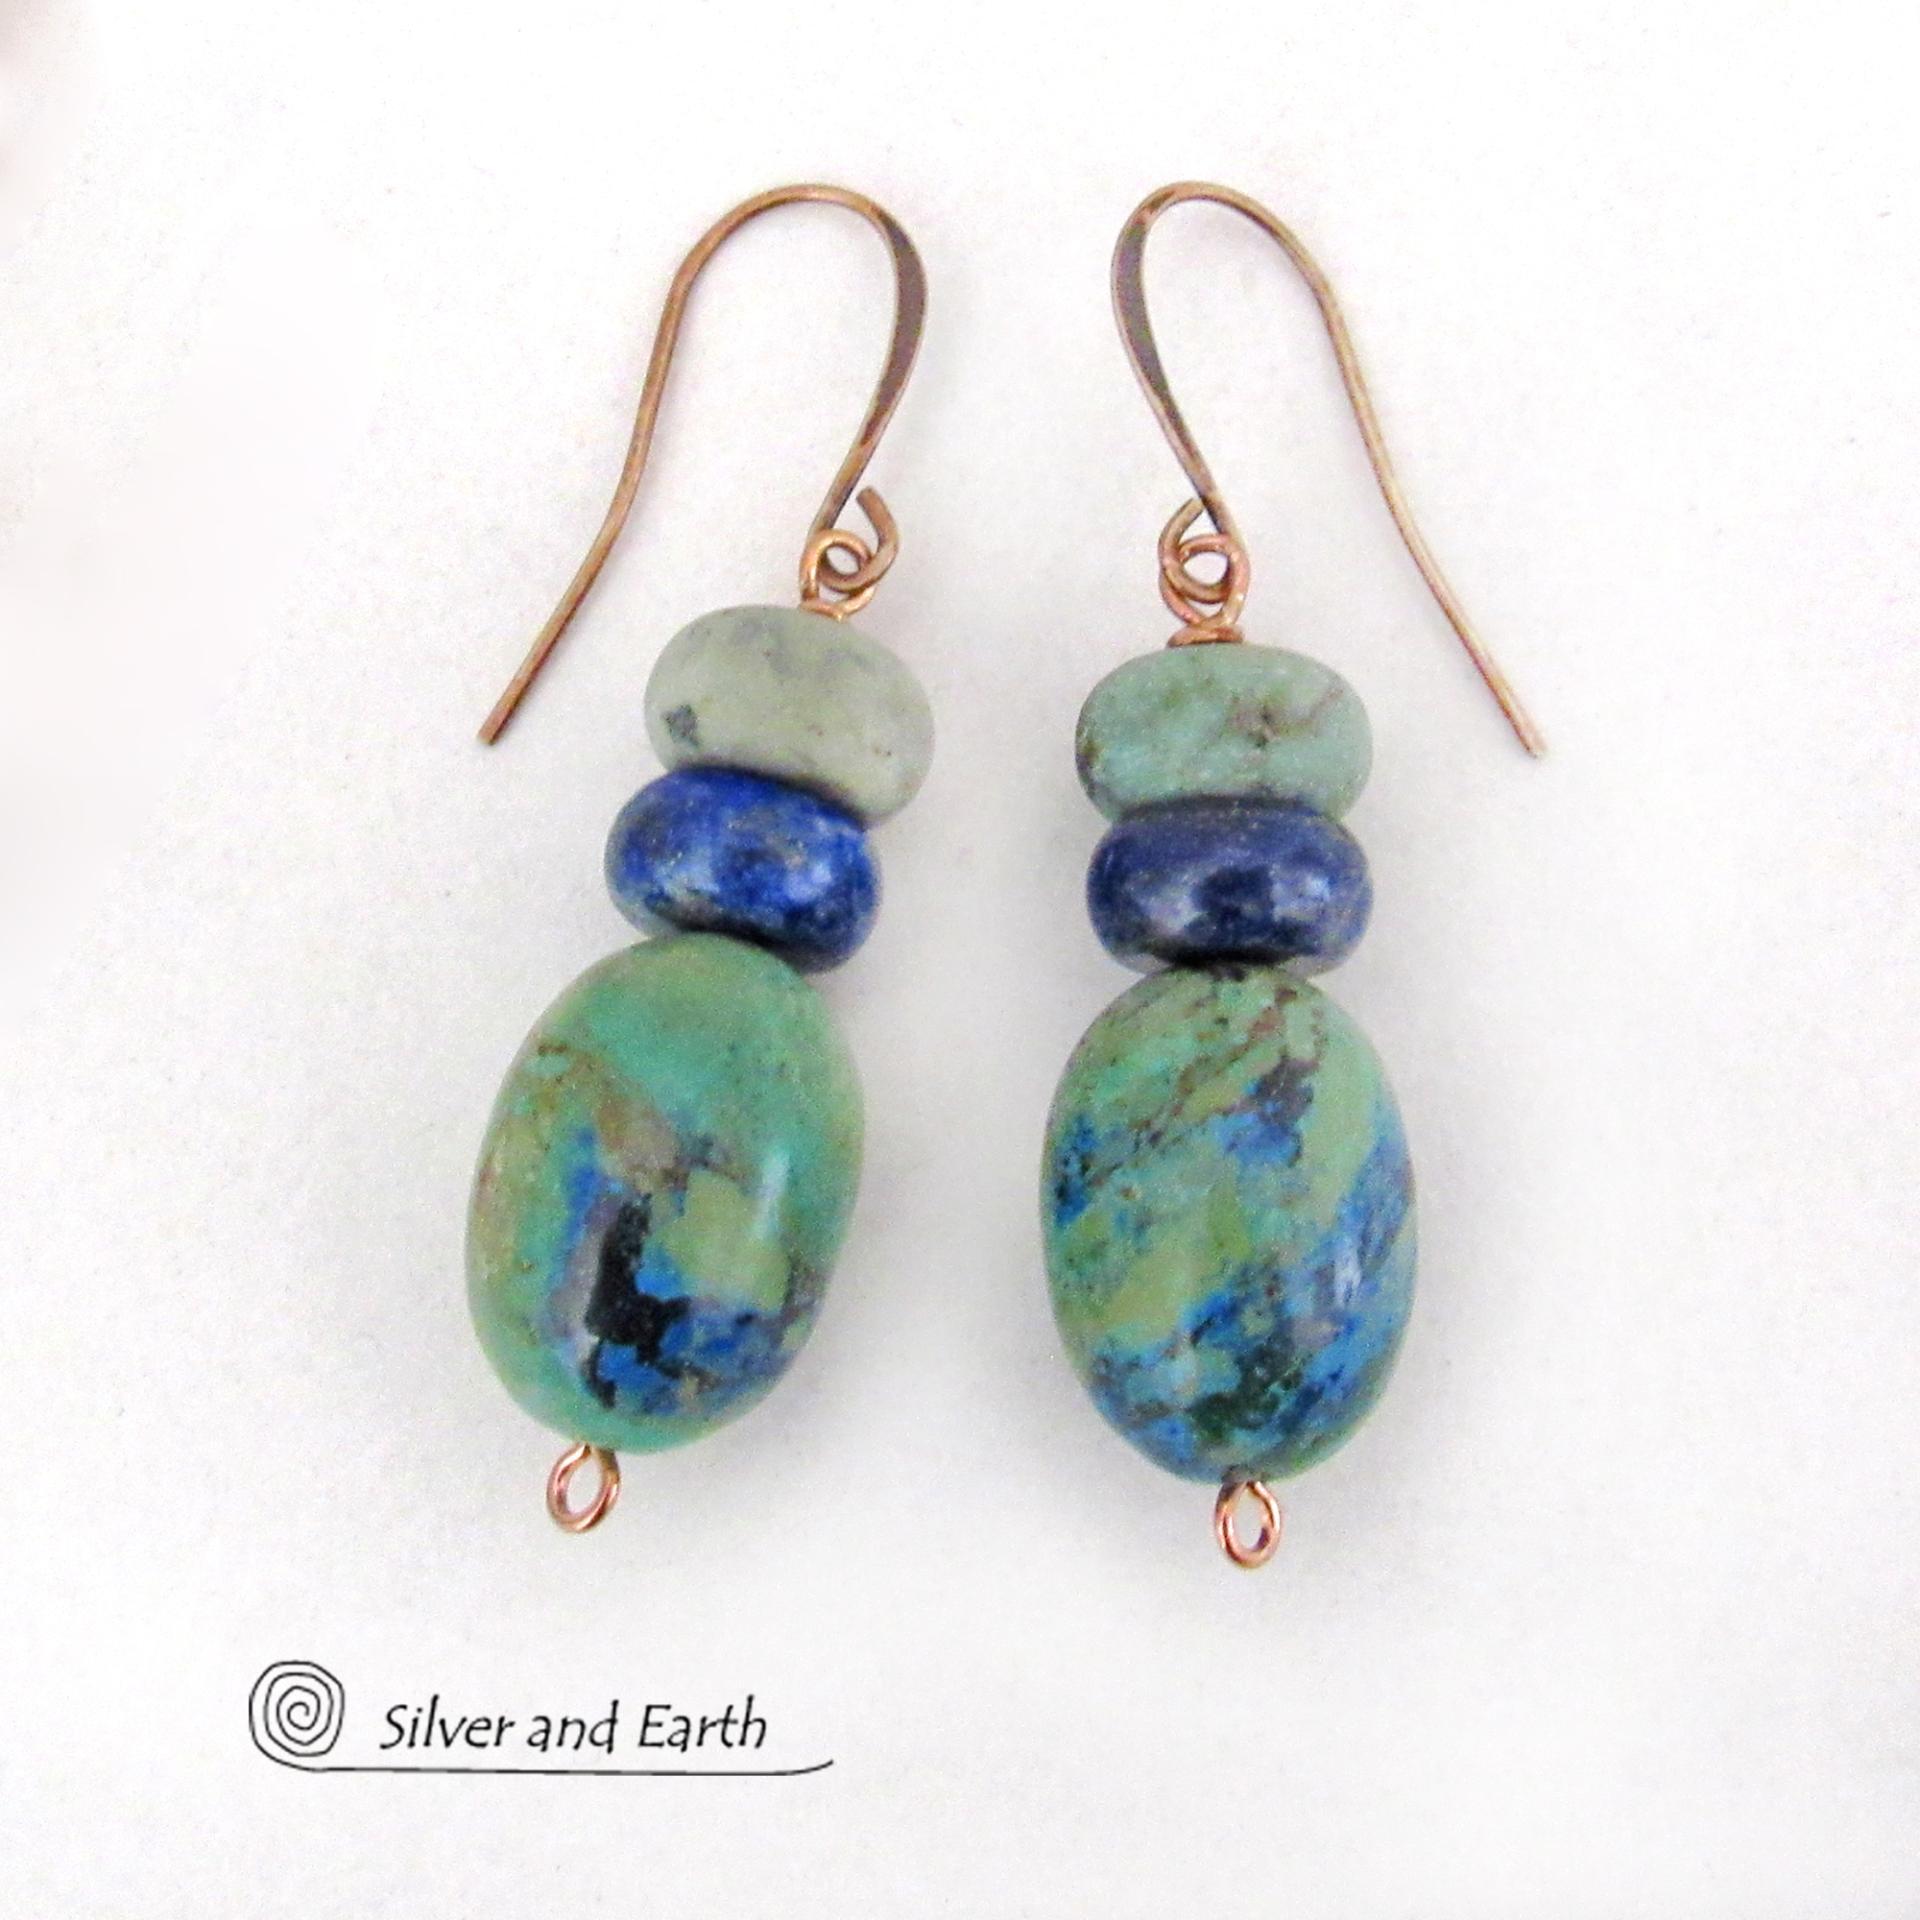 Azurite Malachite Gemstone Earrings with Blue Lapis & African Turquoise - Earthy Natural Stone Jewelry